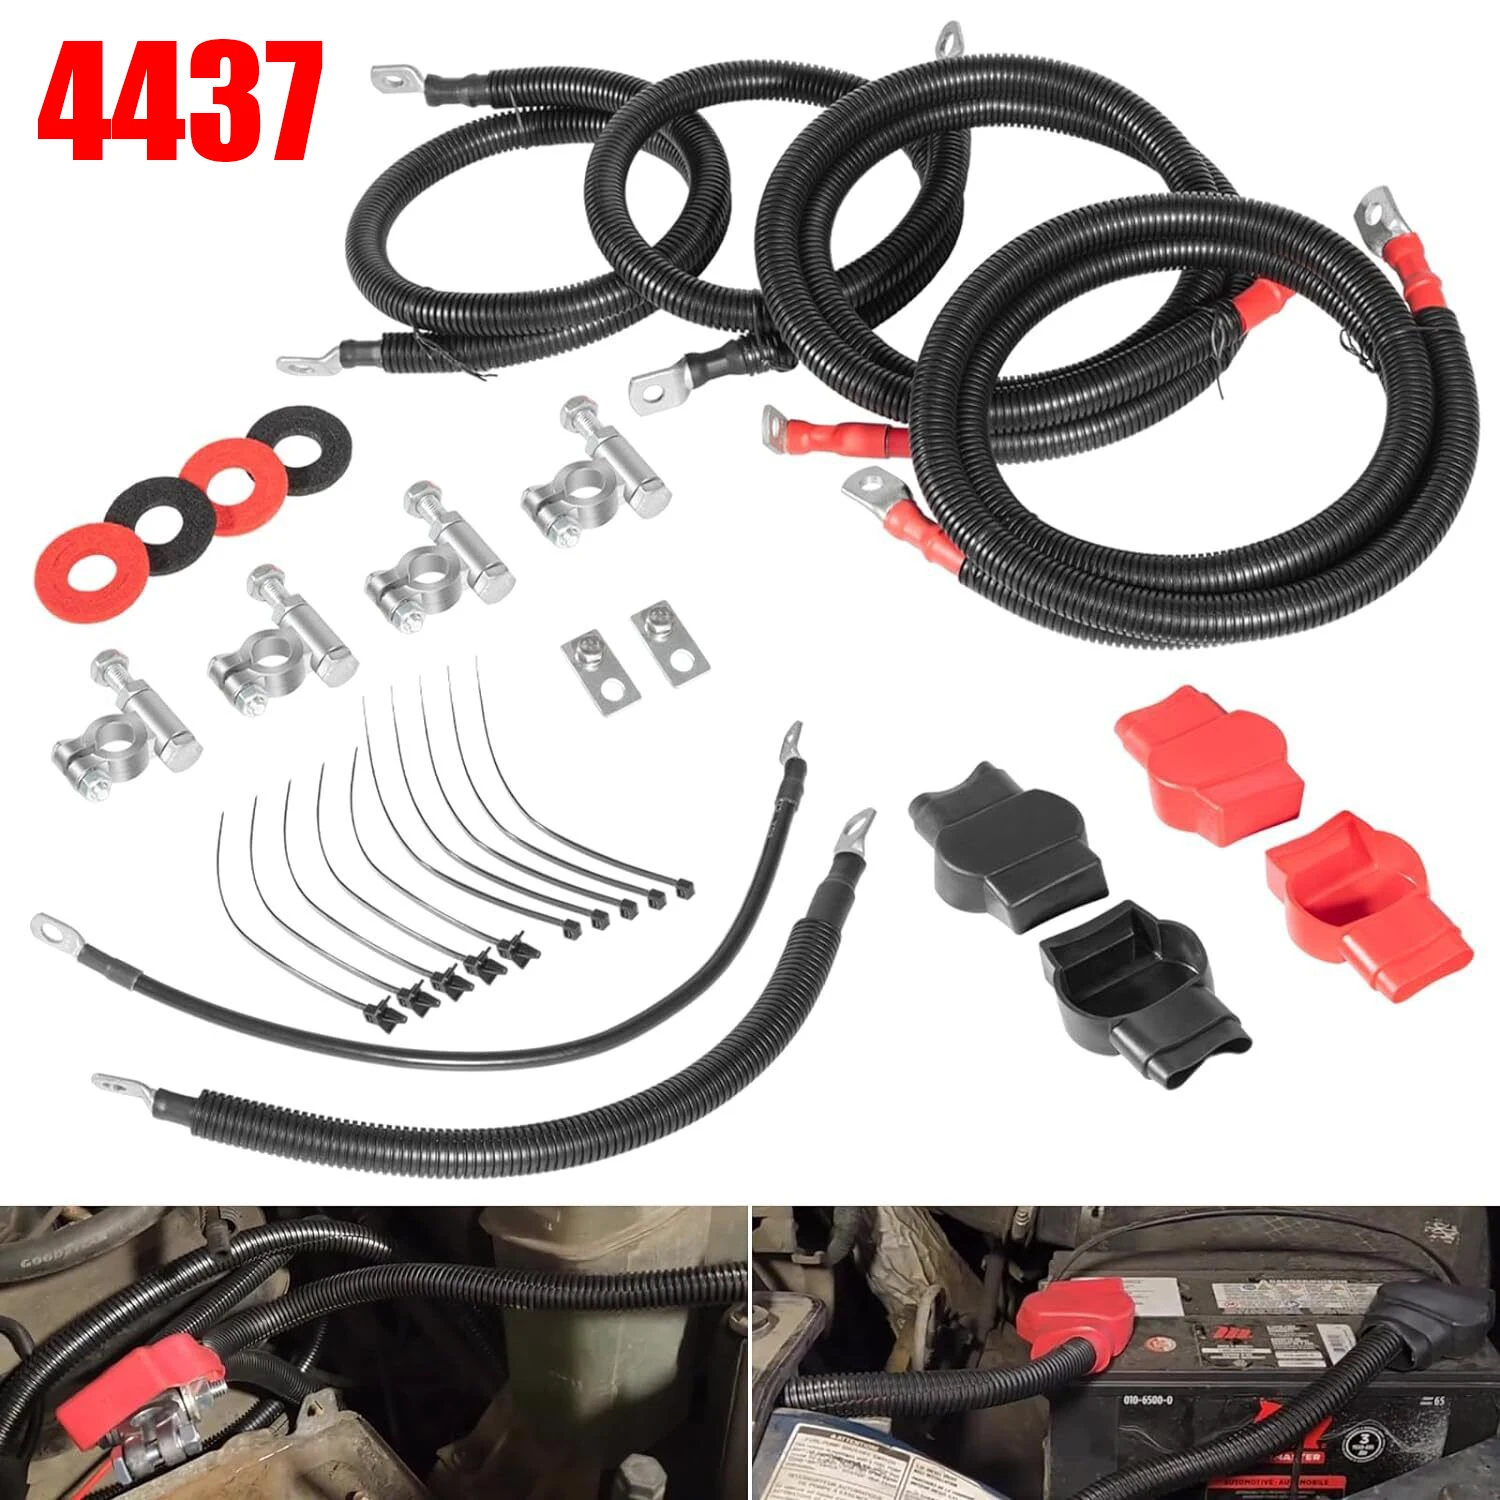 

Ford 6.0L Powerstroke Battery Cables Replacement Kit for 2003-2007 Ford Superduty F250 F350 F450 6.0L Powerstroke 2/0 Starter